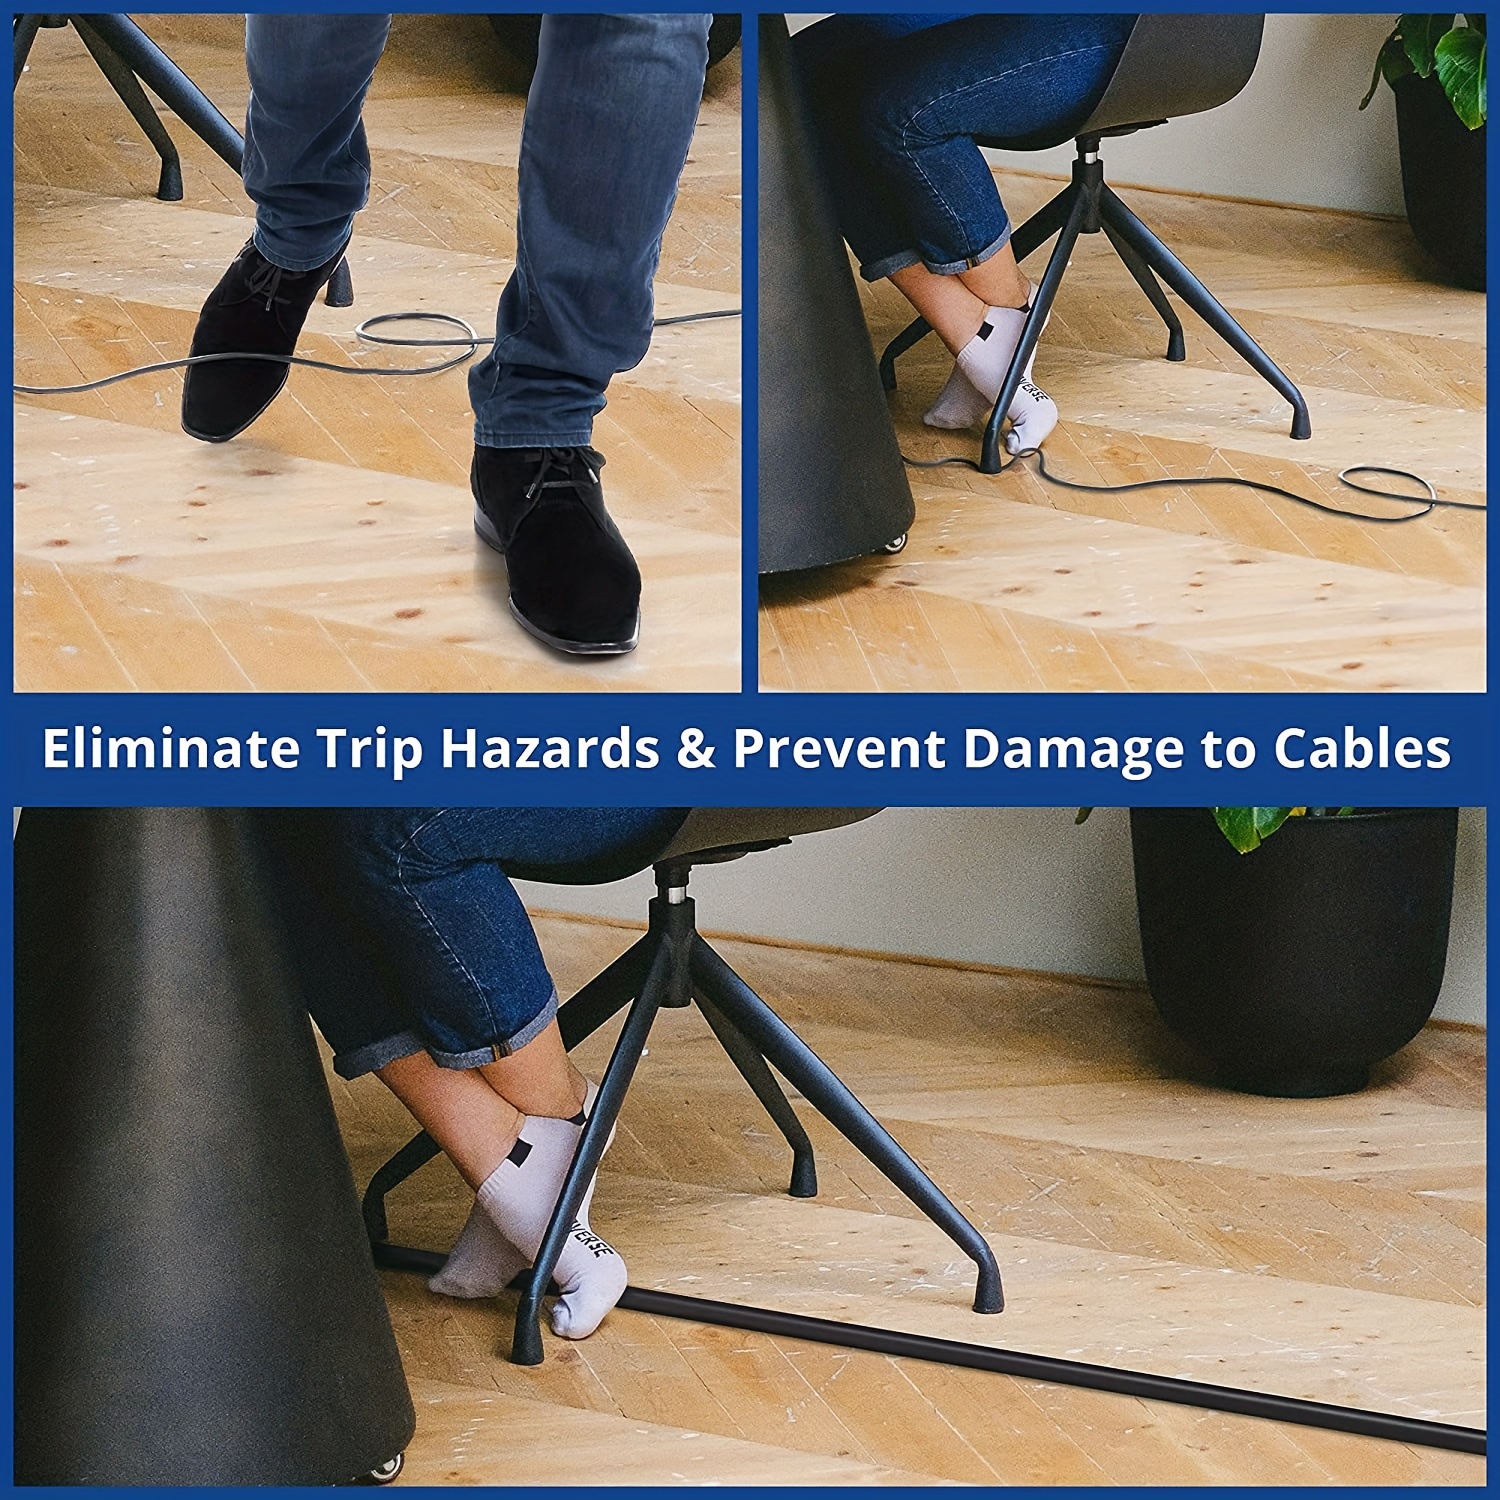 Bates- Floor Cord Cover, 6ft Cable Cover, Cord Cover Floor, Cord Protector,  Floor Cable Cover, Cord Hider Floor - Bates Choice